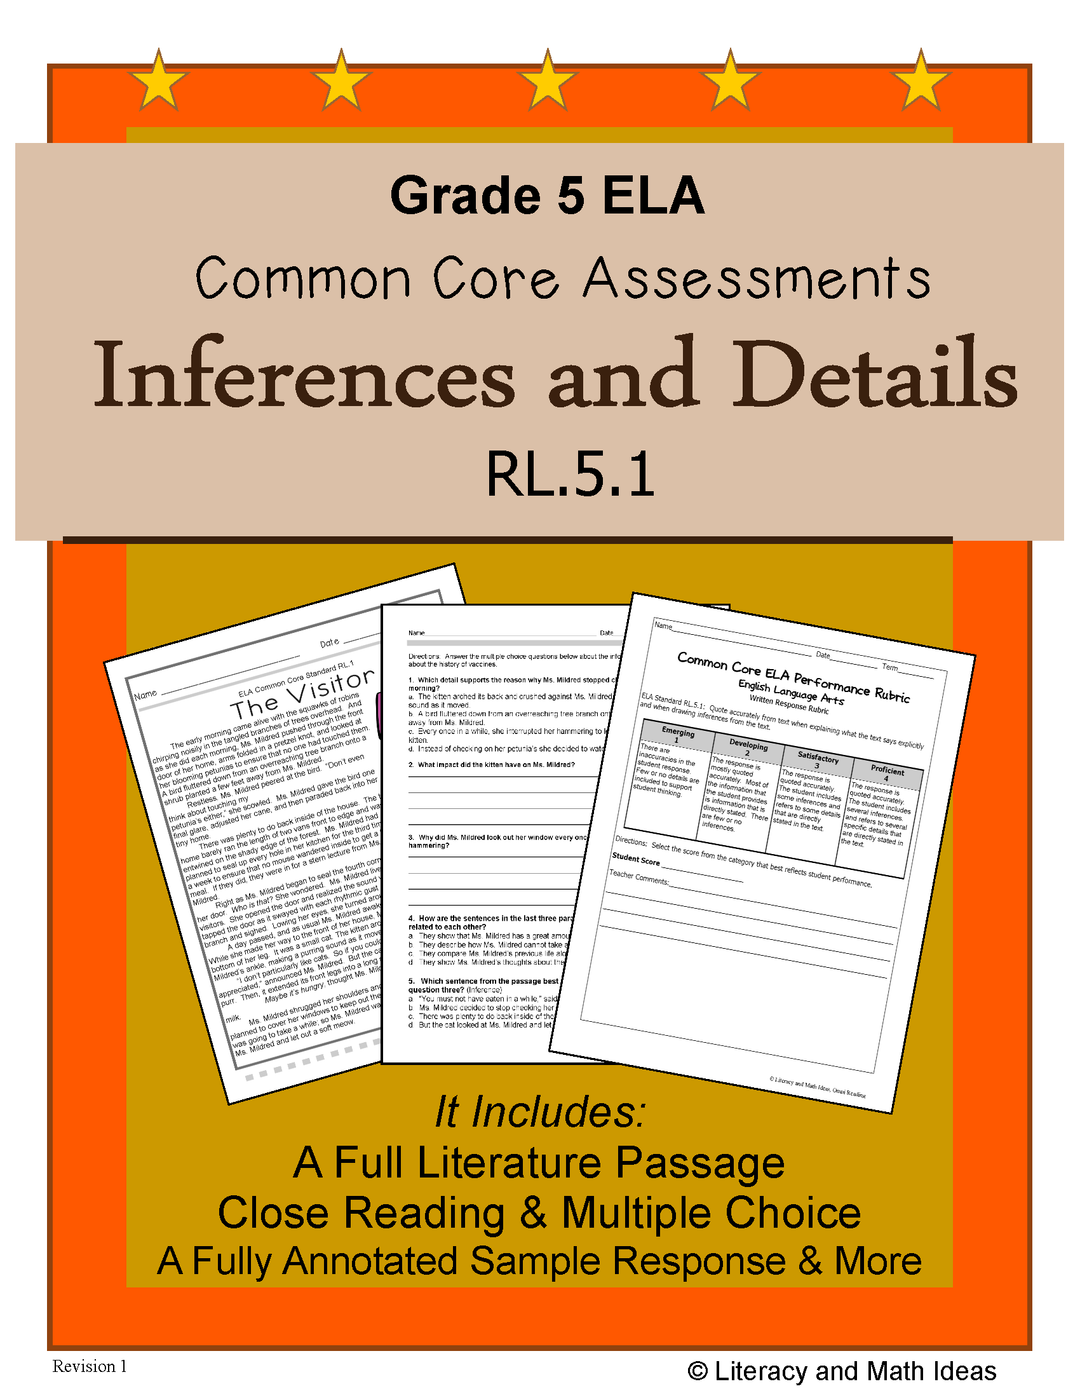 Grade 5 Common Core Reading Assessments (19 Assessments)